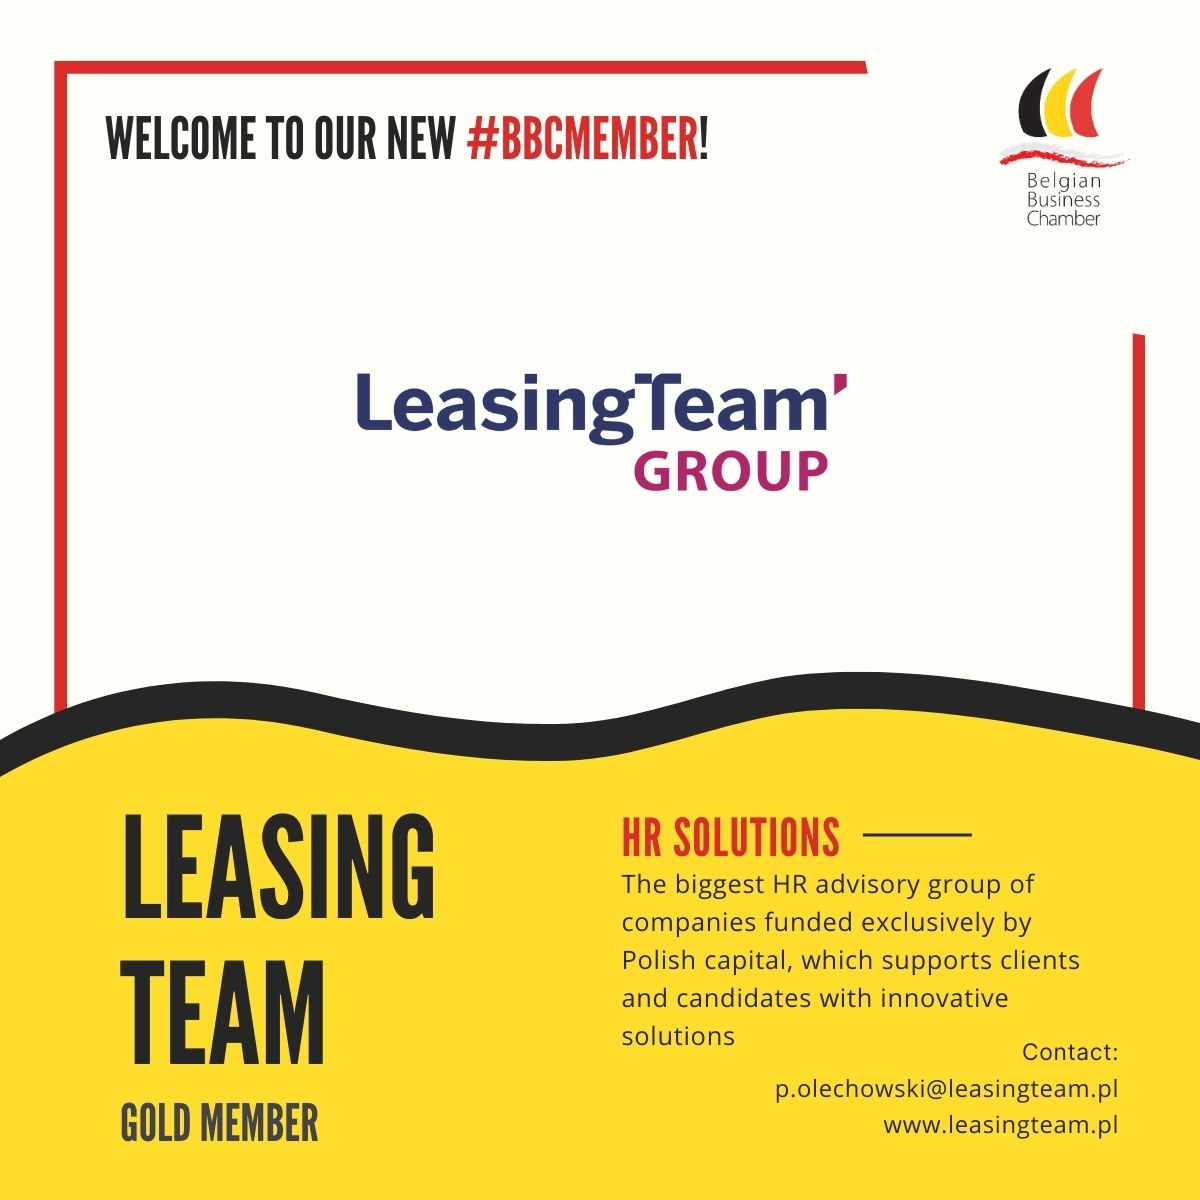 Welcome our new member - Leasing Team Group!